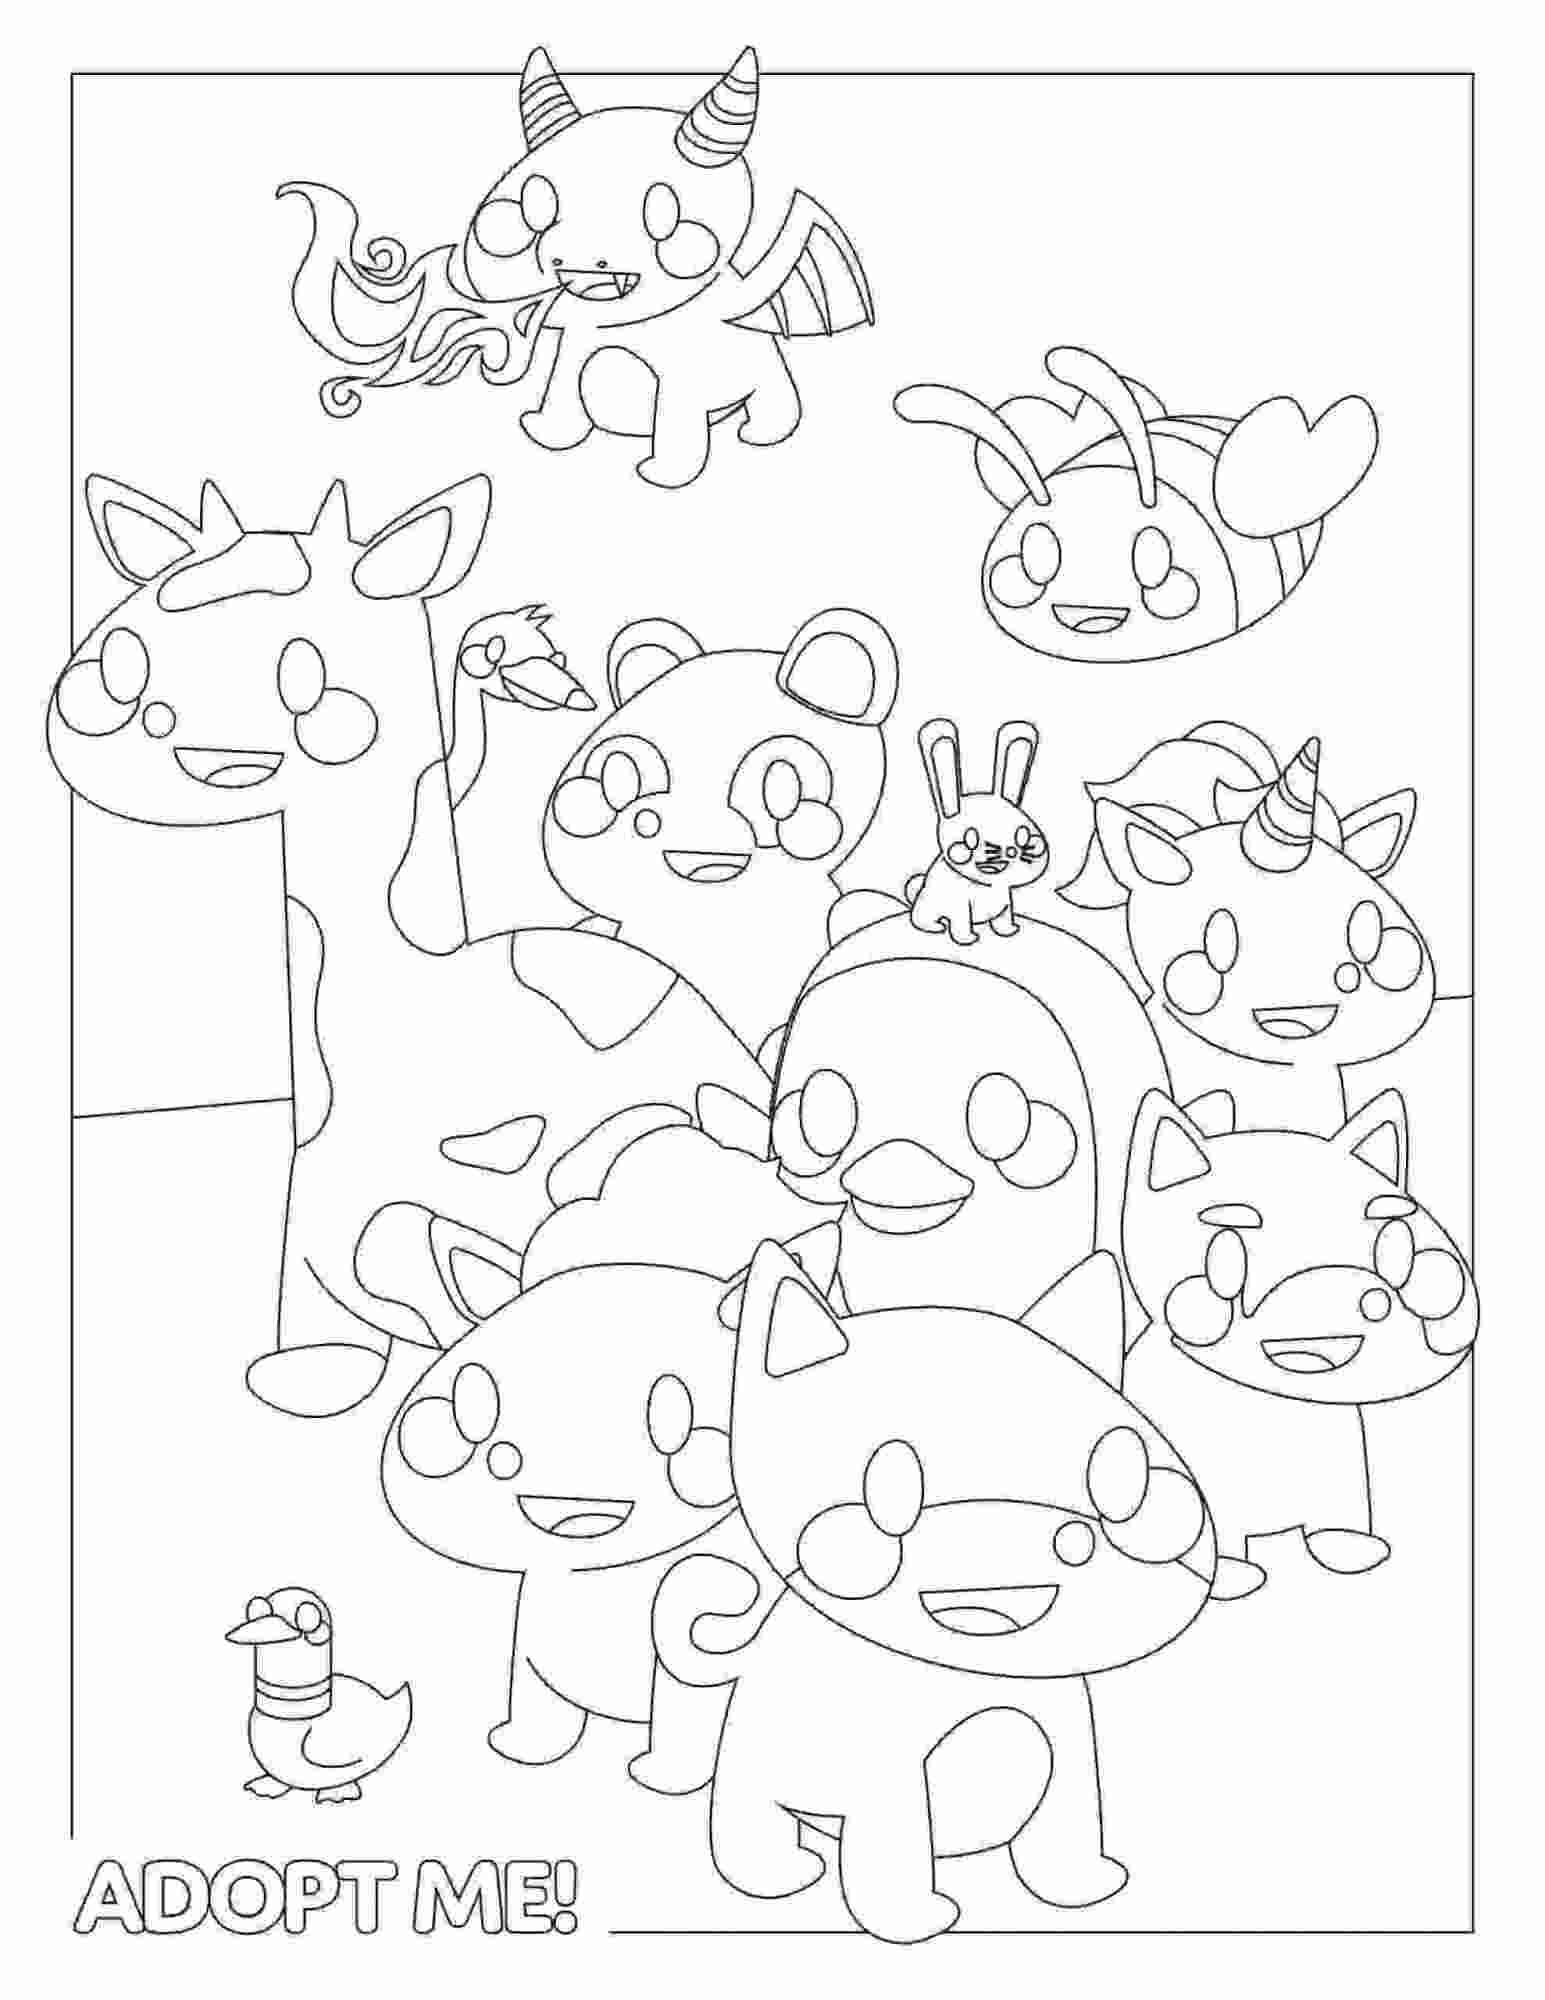 All animals from Adopt me video games Coloring Pages - Adopt me